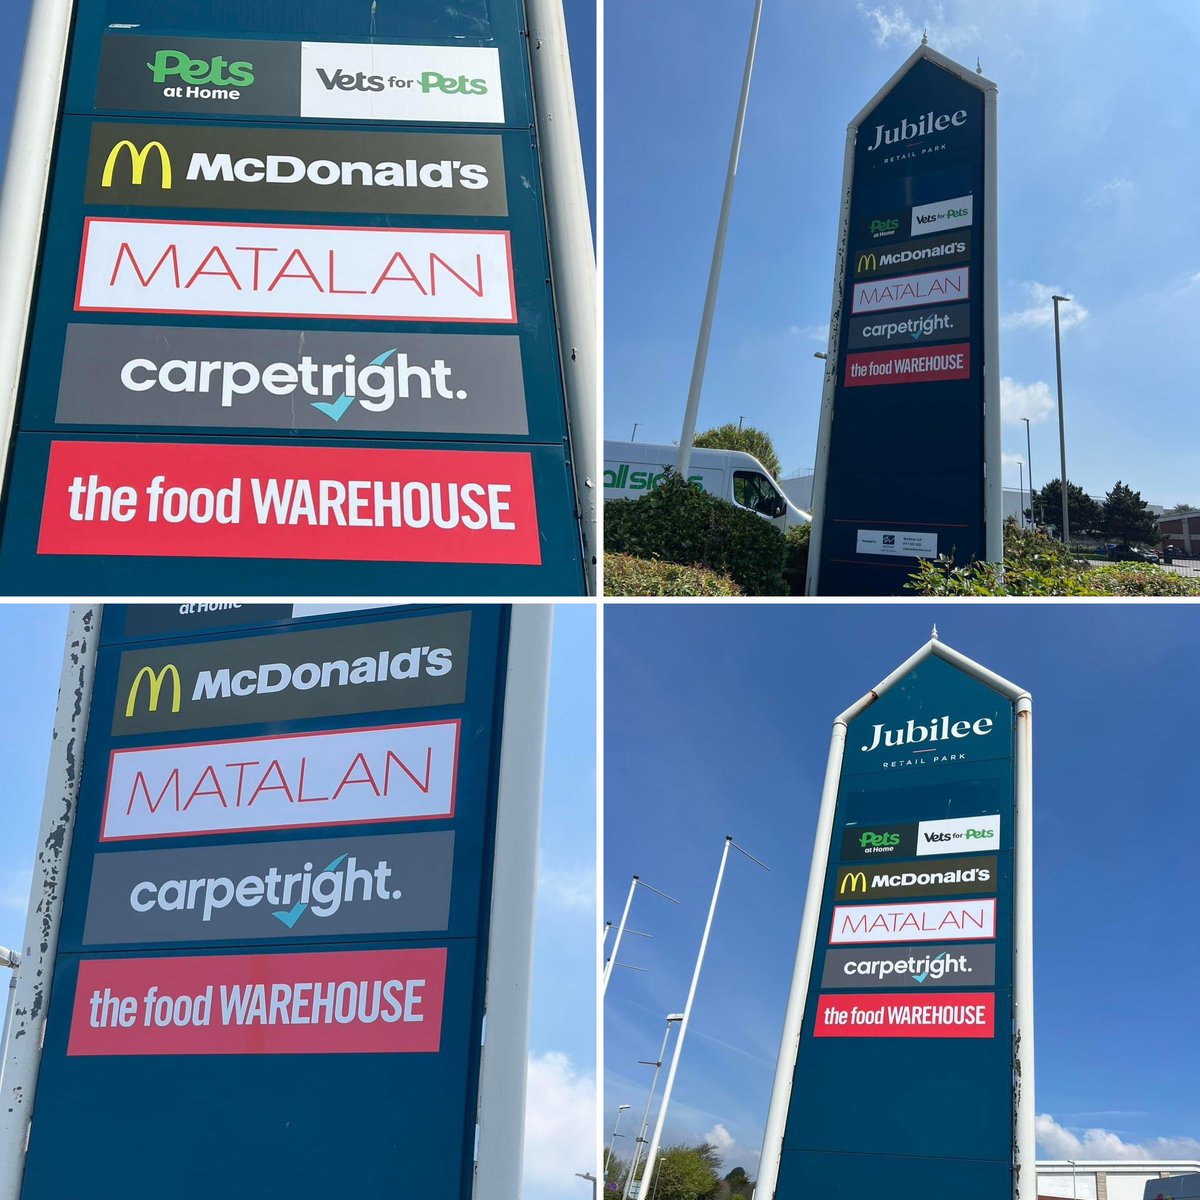 In search of some much needed ☀️☀️☀️we headed down to Weymouth. Whilst there we thought would change the prints at Jubilee park to make the search worthwhile #sign #signs #signshop #signcompany #signdesign #signfabrication #signguy #signandgraphics #signmaker #signmaking